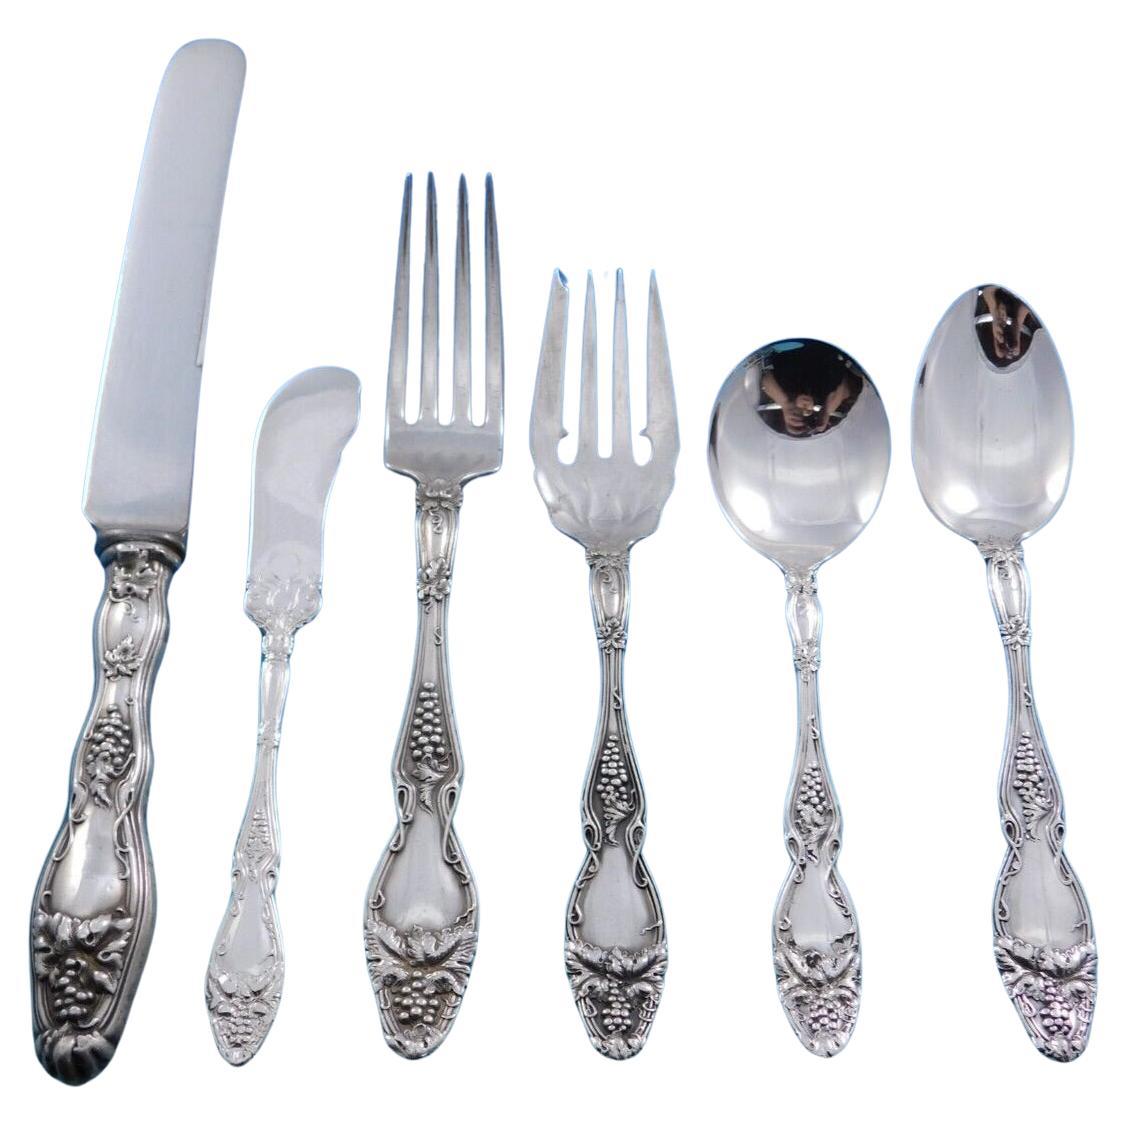 Cloeta by International Sterling Silver Flatware Set for 6 Service 36 pcs Grapes For Sale